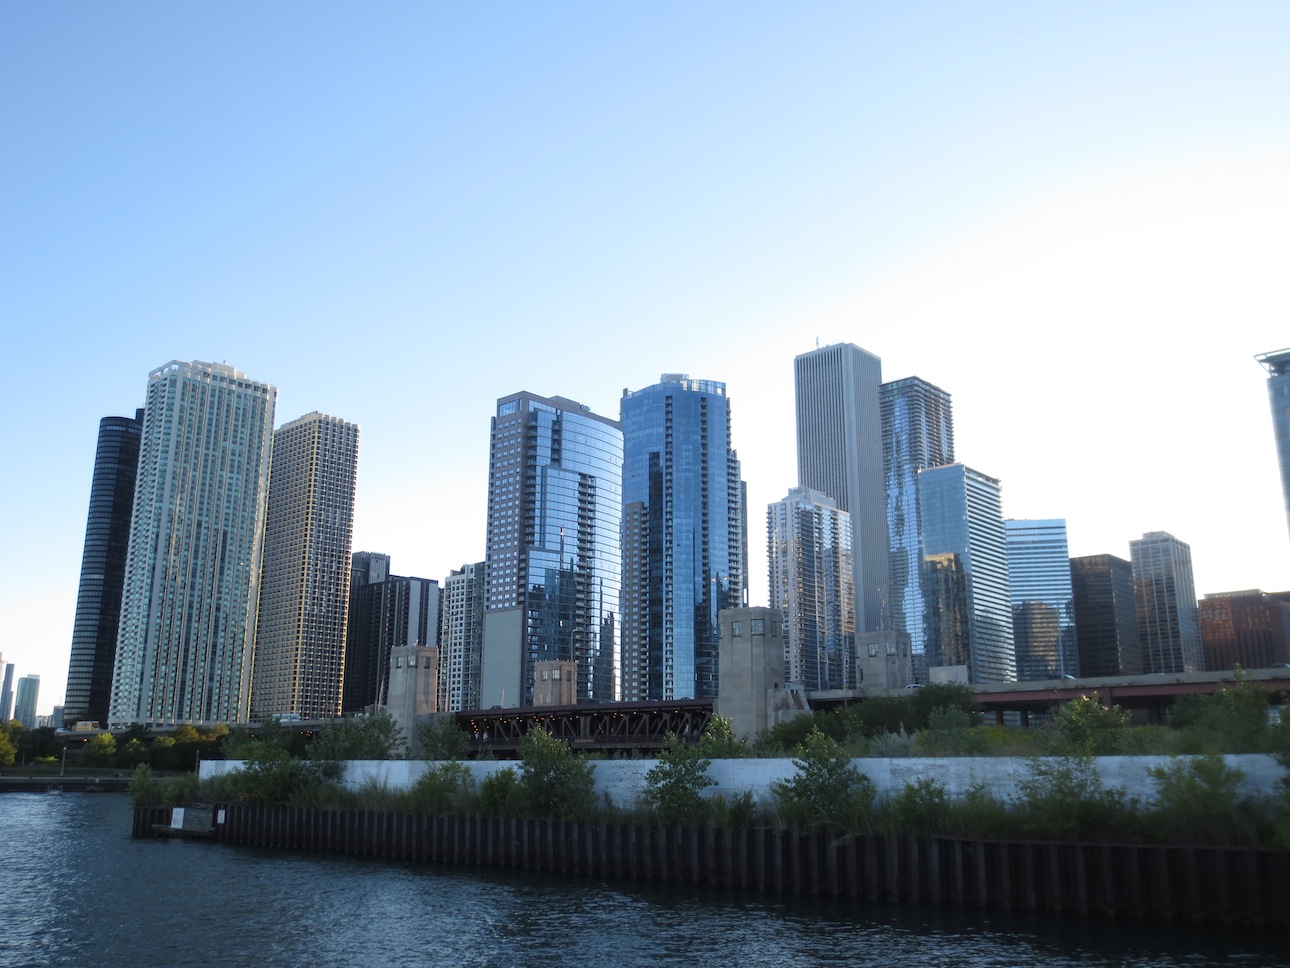 Chicago architecture from the lake.